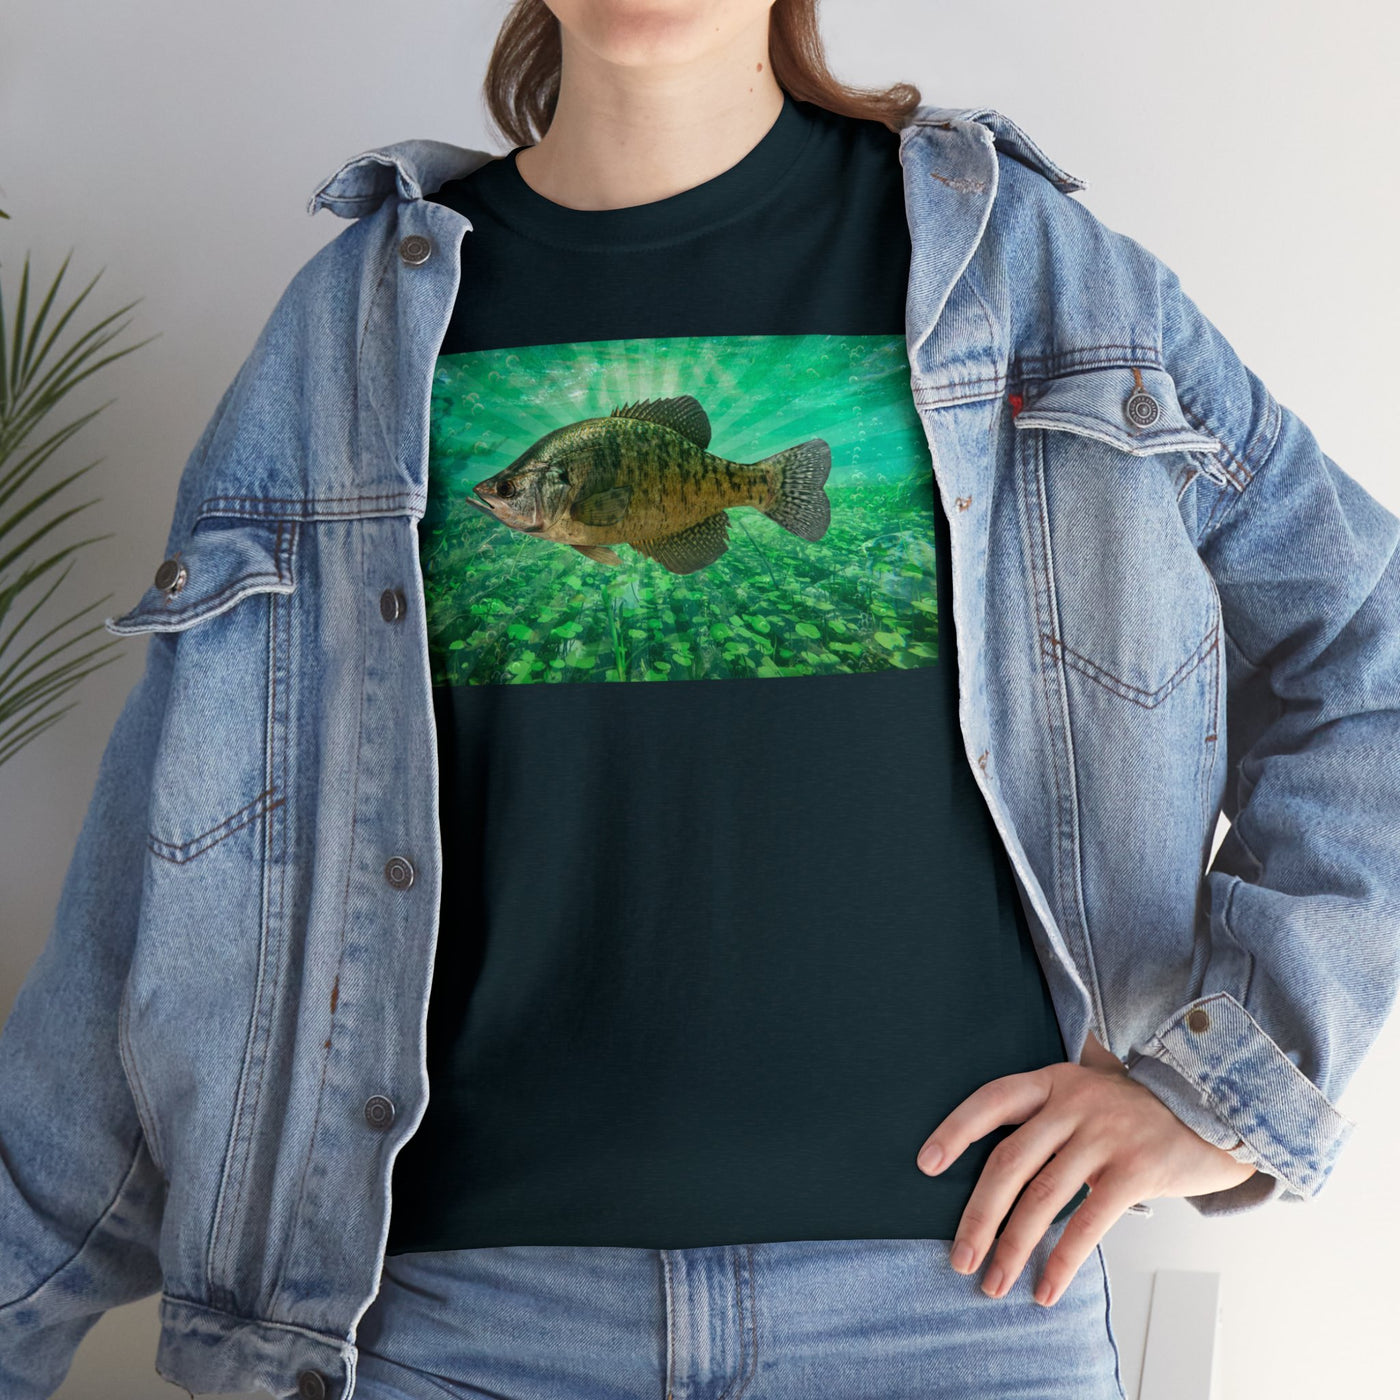 Fishing Planet Crappie Cotton Tee